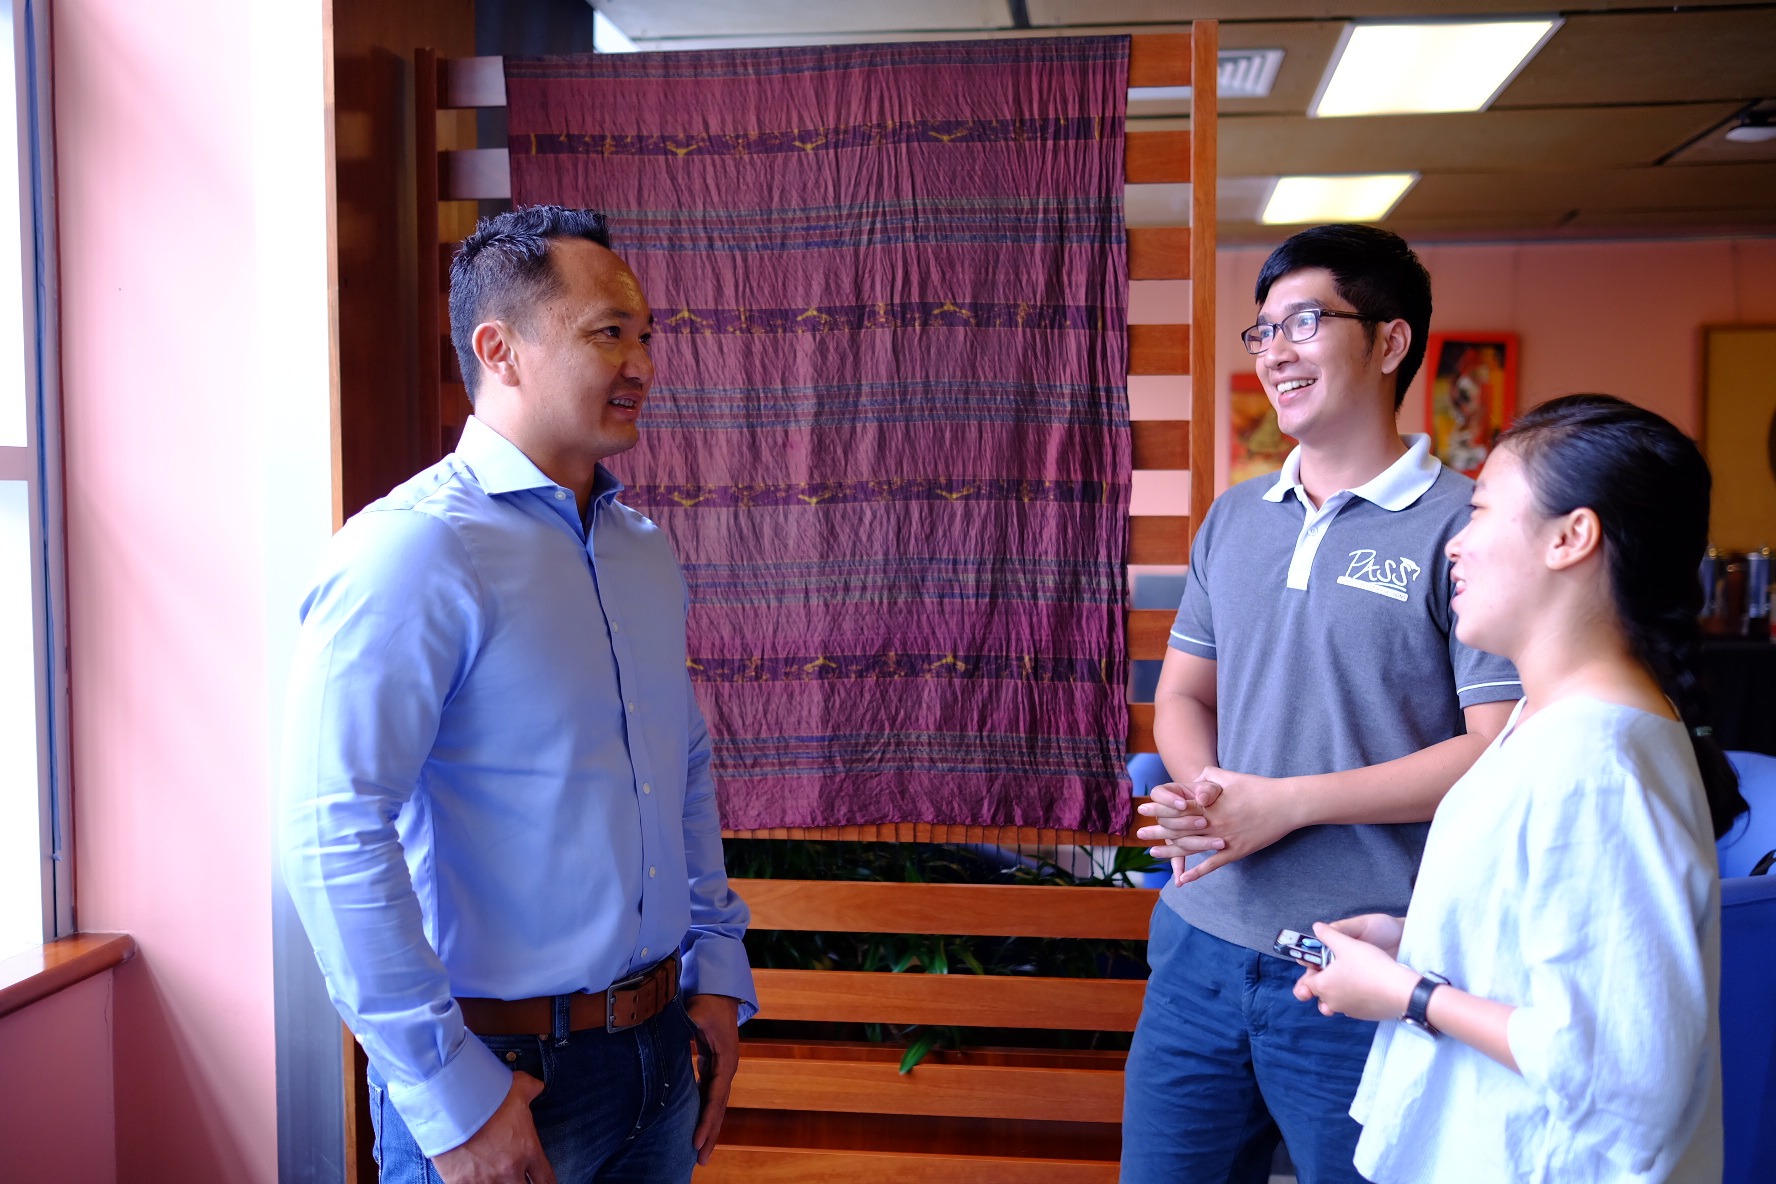 Mr Tim Nguyen spoke with students after the talk show.